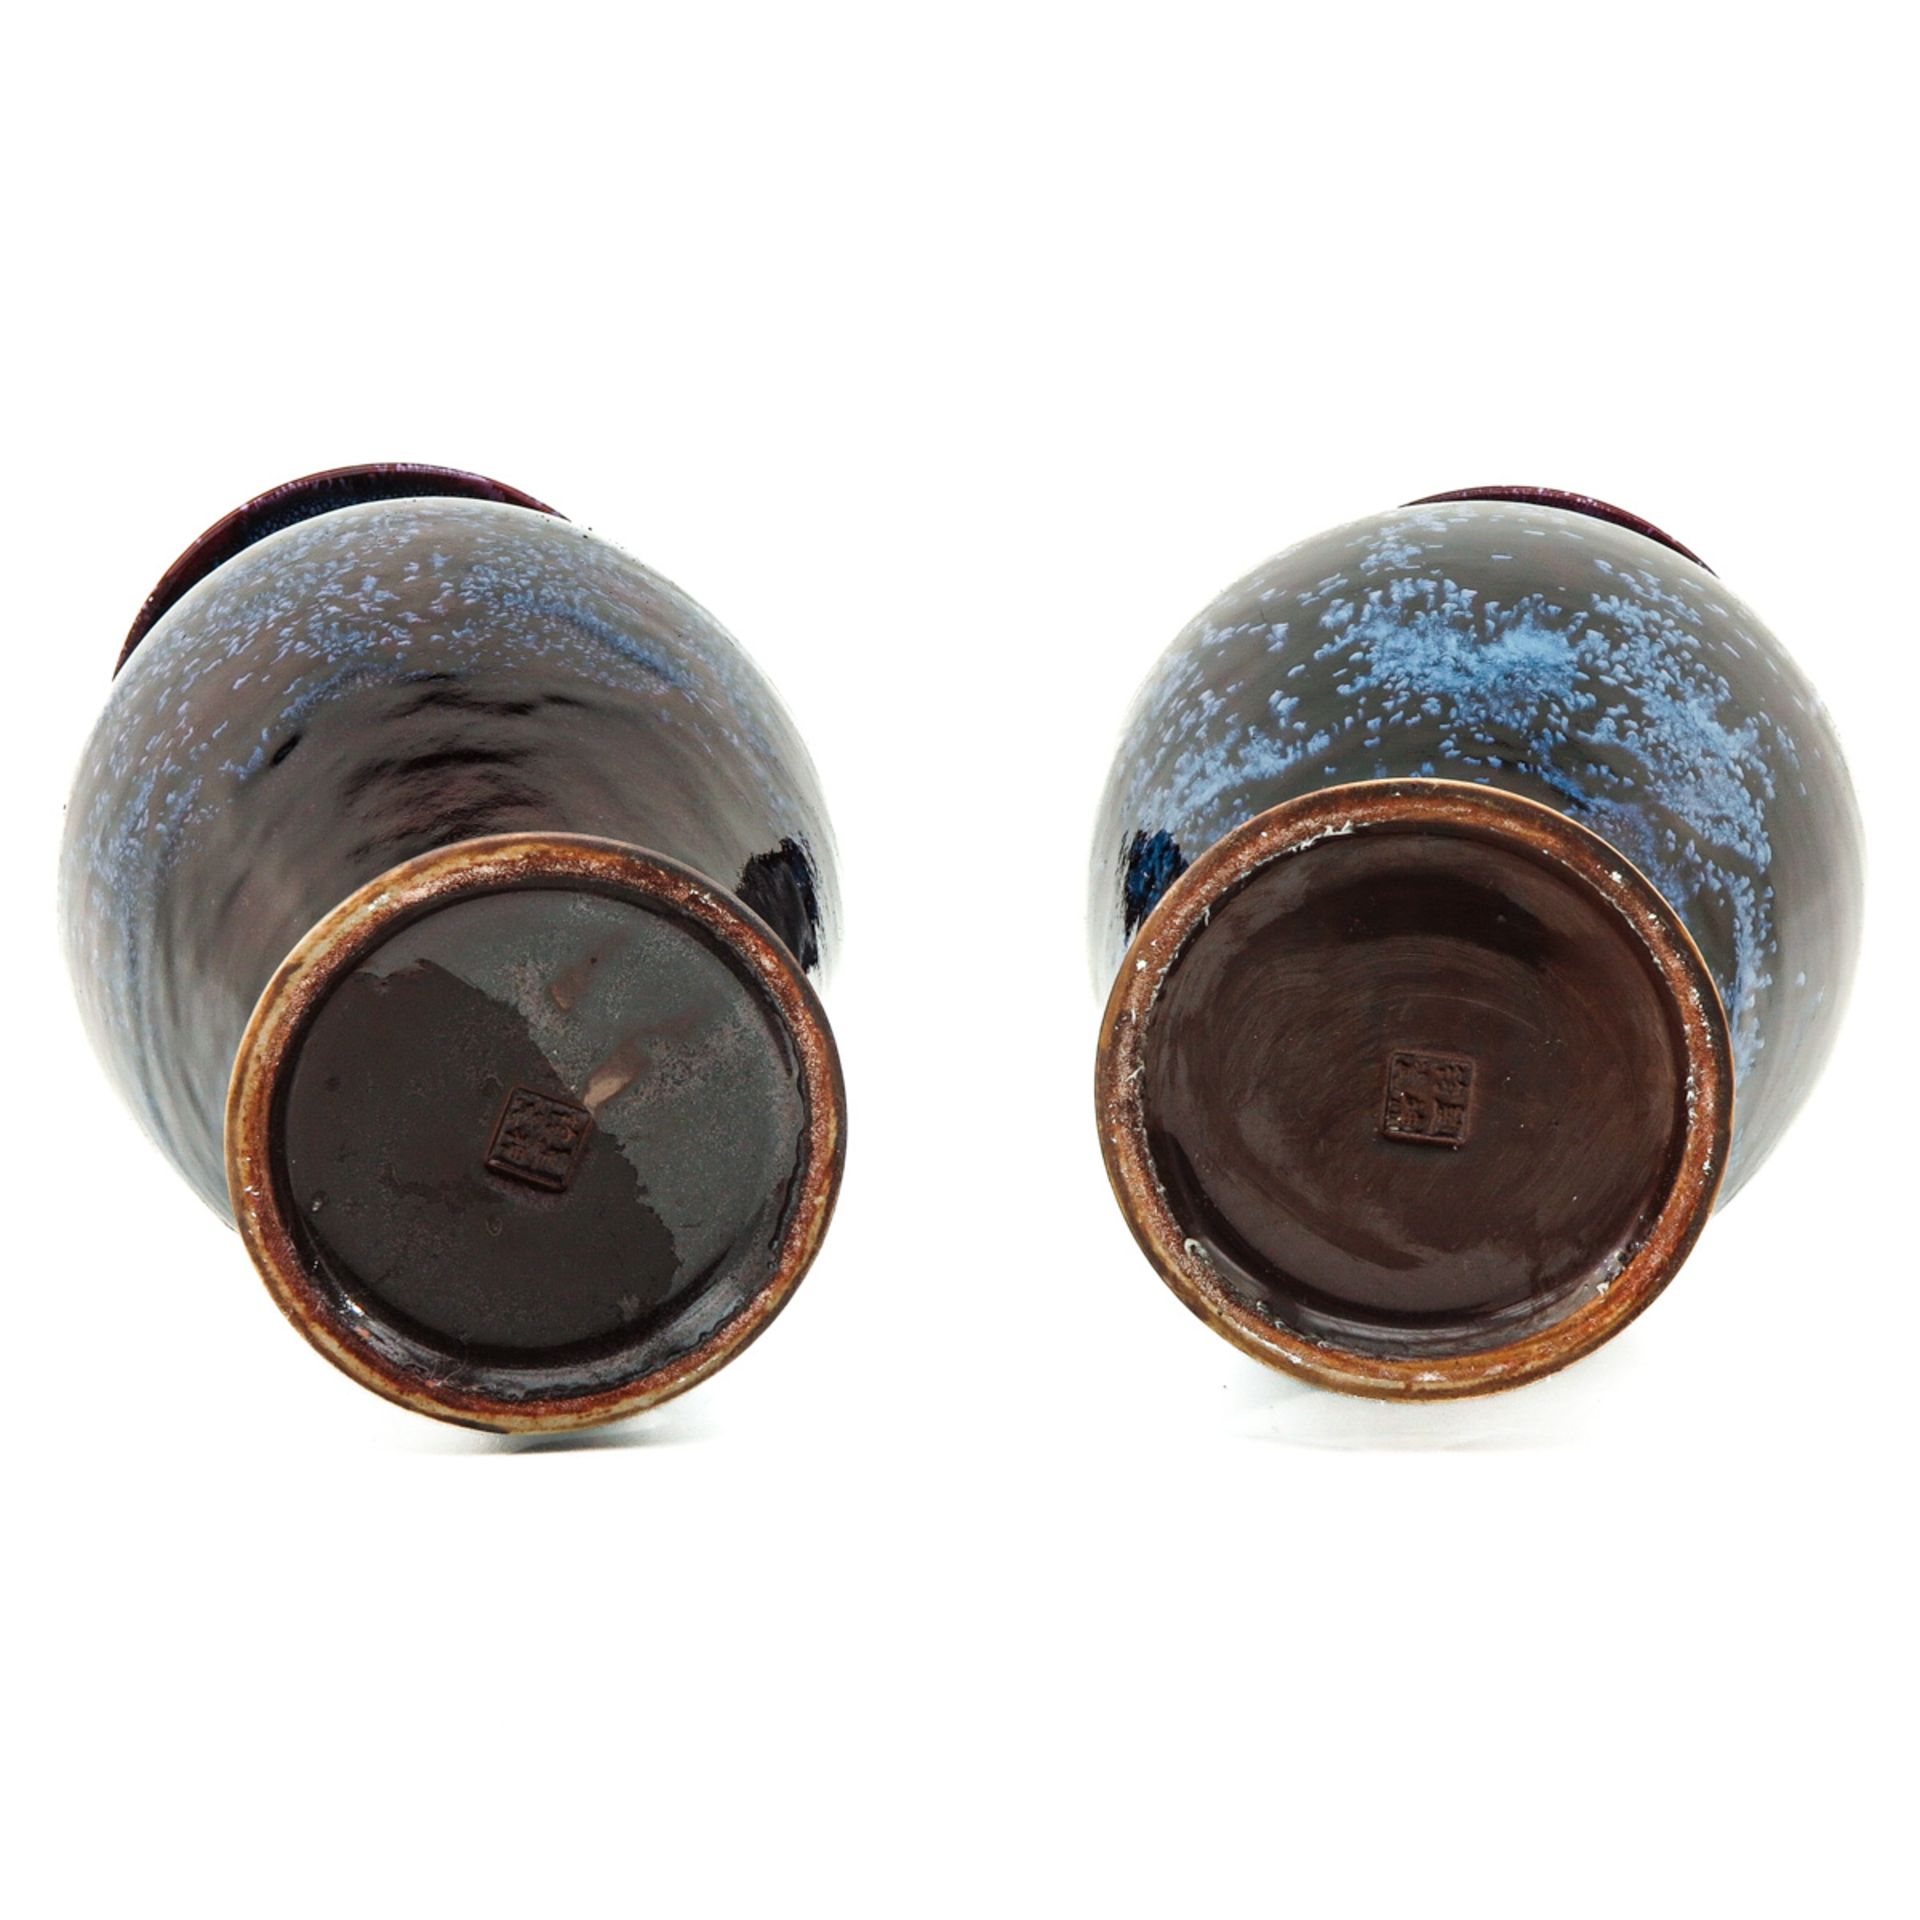 A Pair of Jun Ware Vases - Image 6 of 6